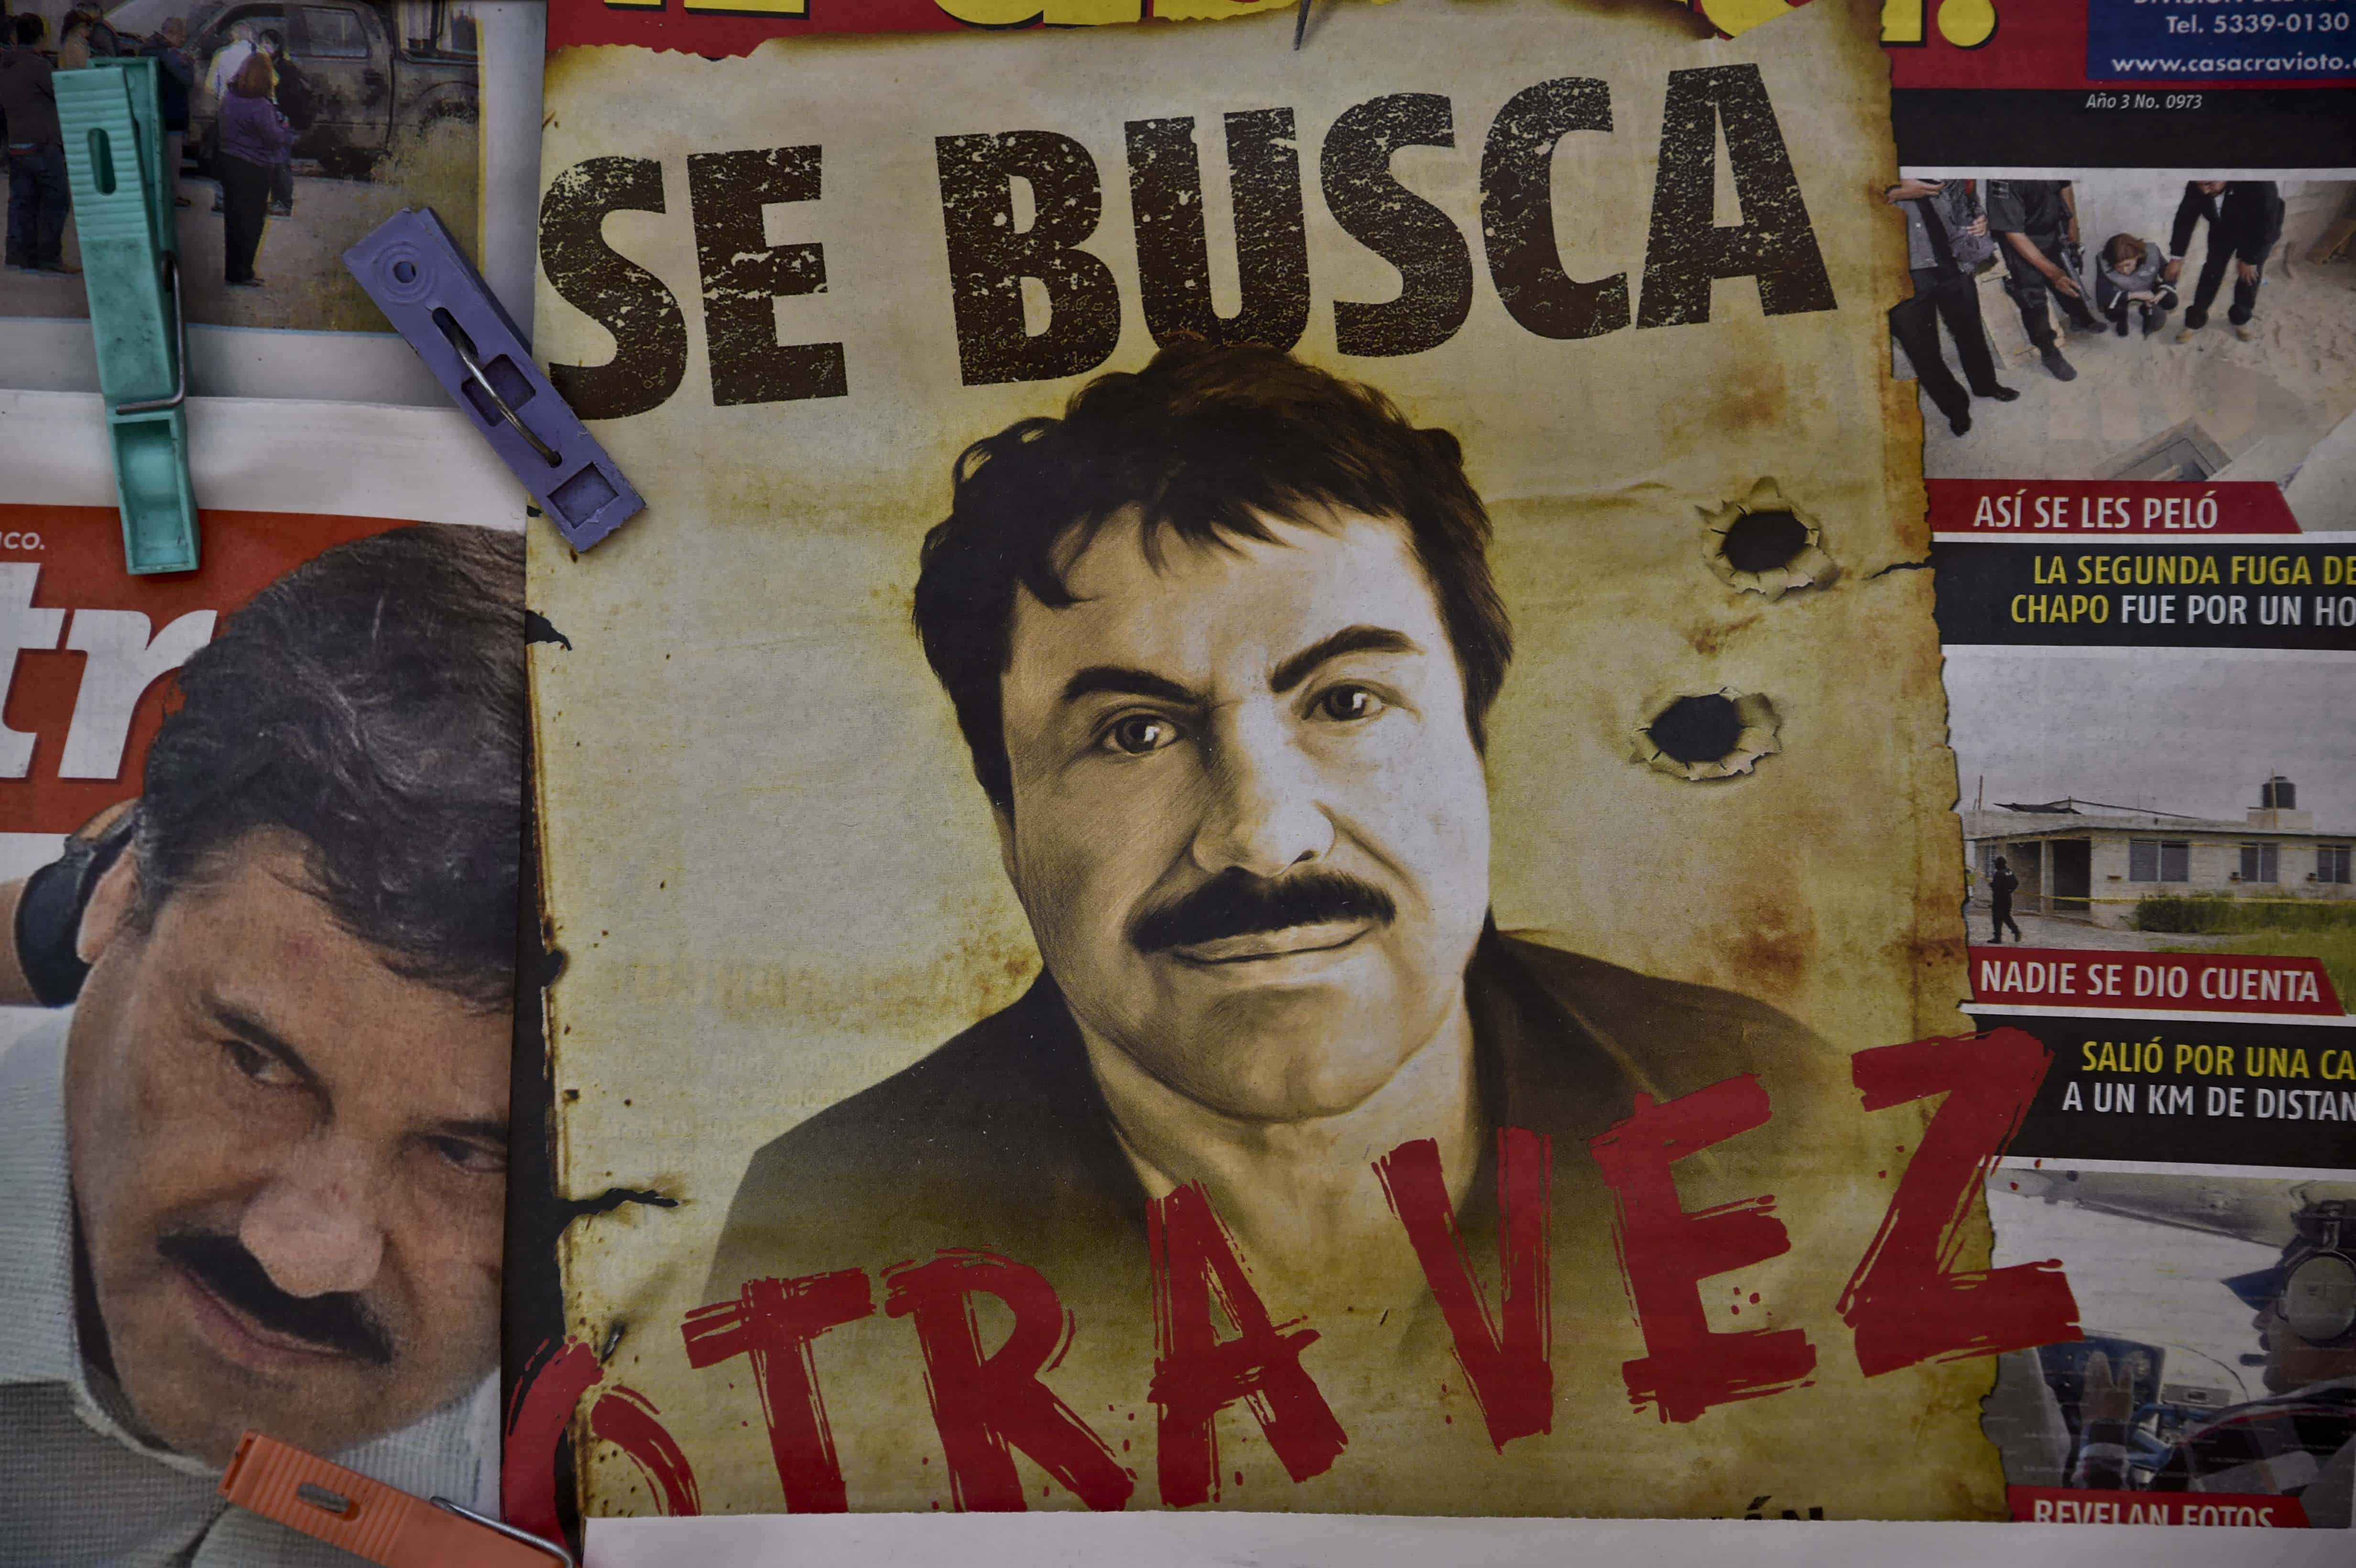 A Sinaloa wanted poster of Mexican drug lord Joaquín 